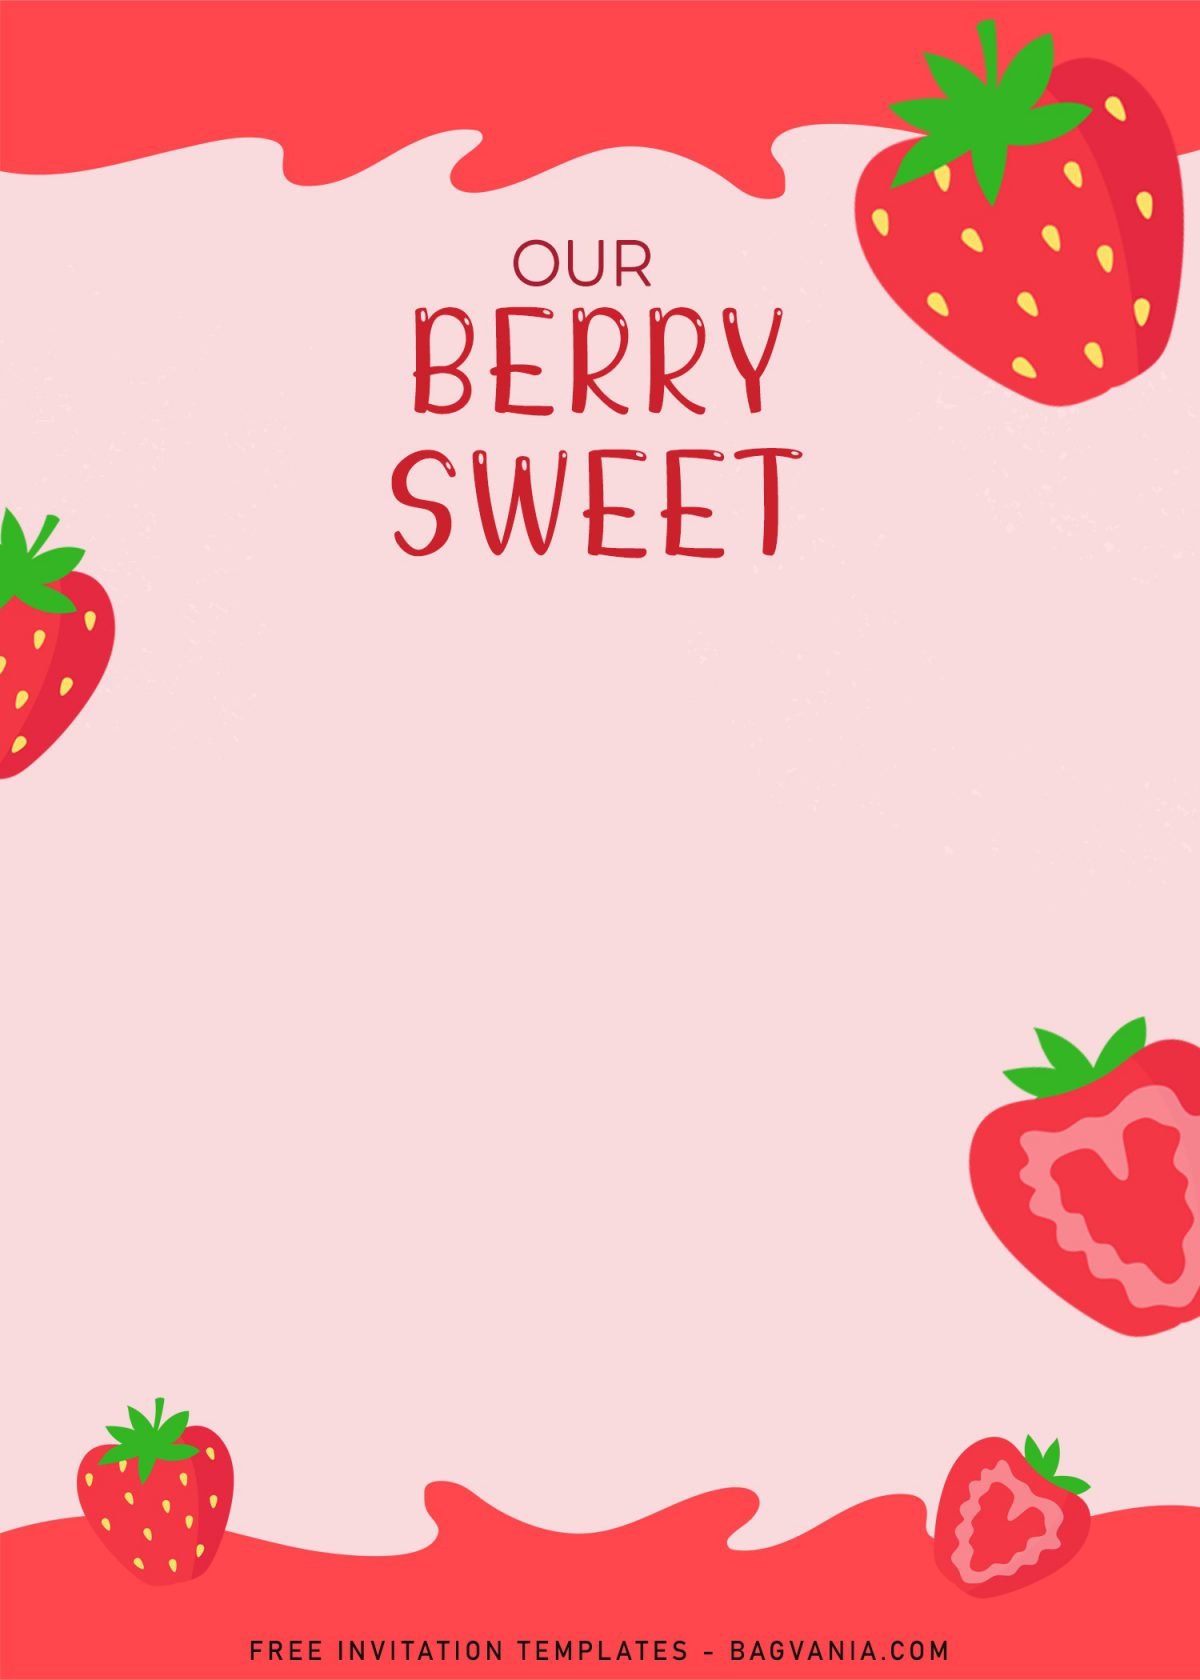 8+ Strawberry Birthday Invitation Templates For Girl Birthday Party and has 